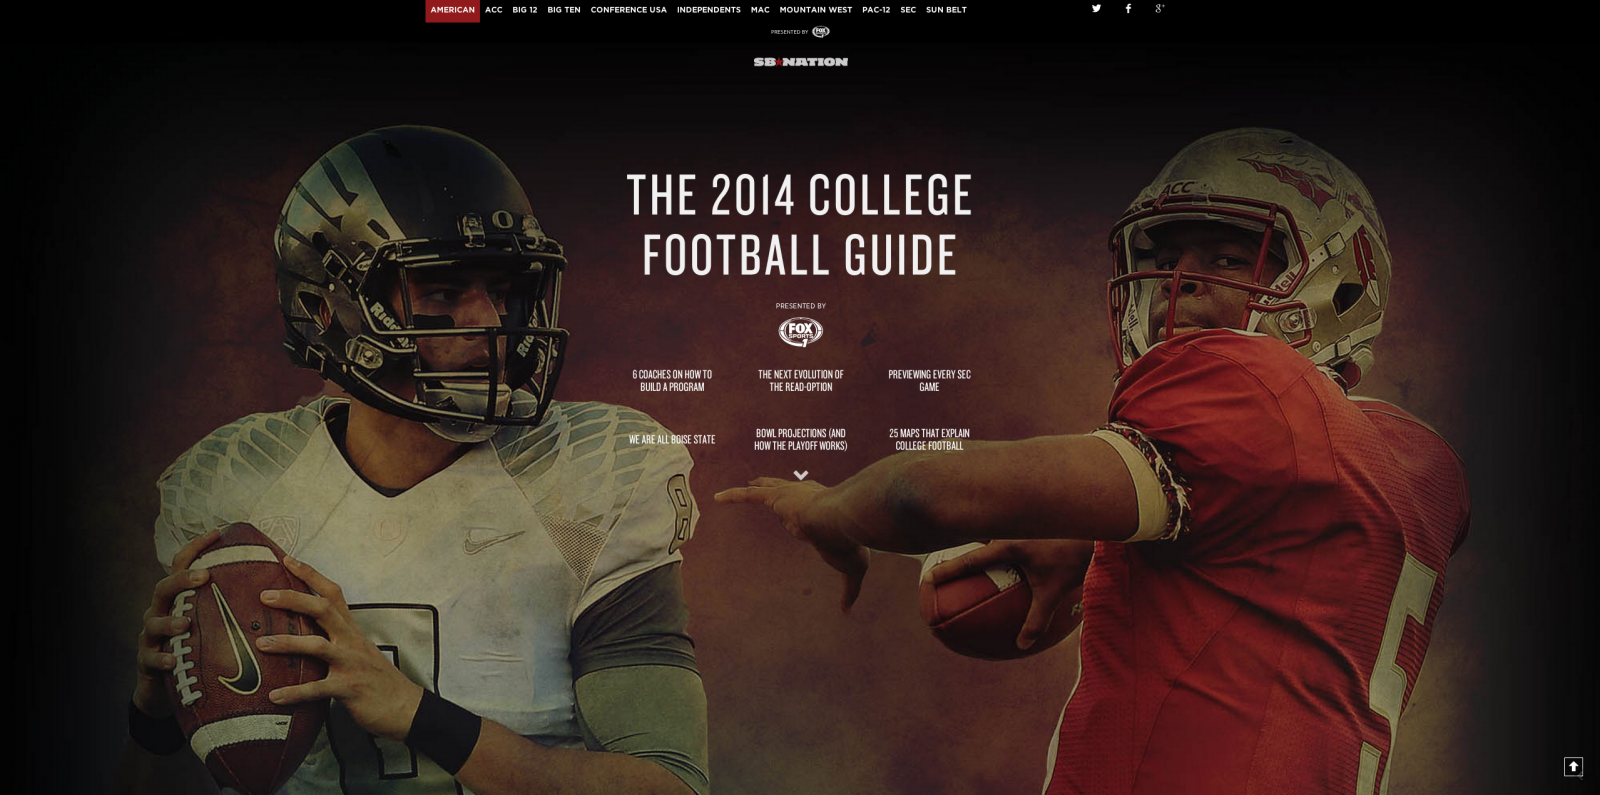 SB Nation's College Football guide